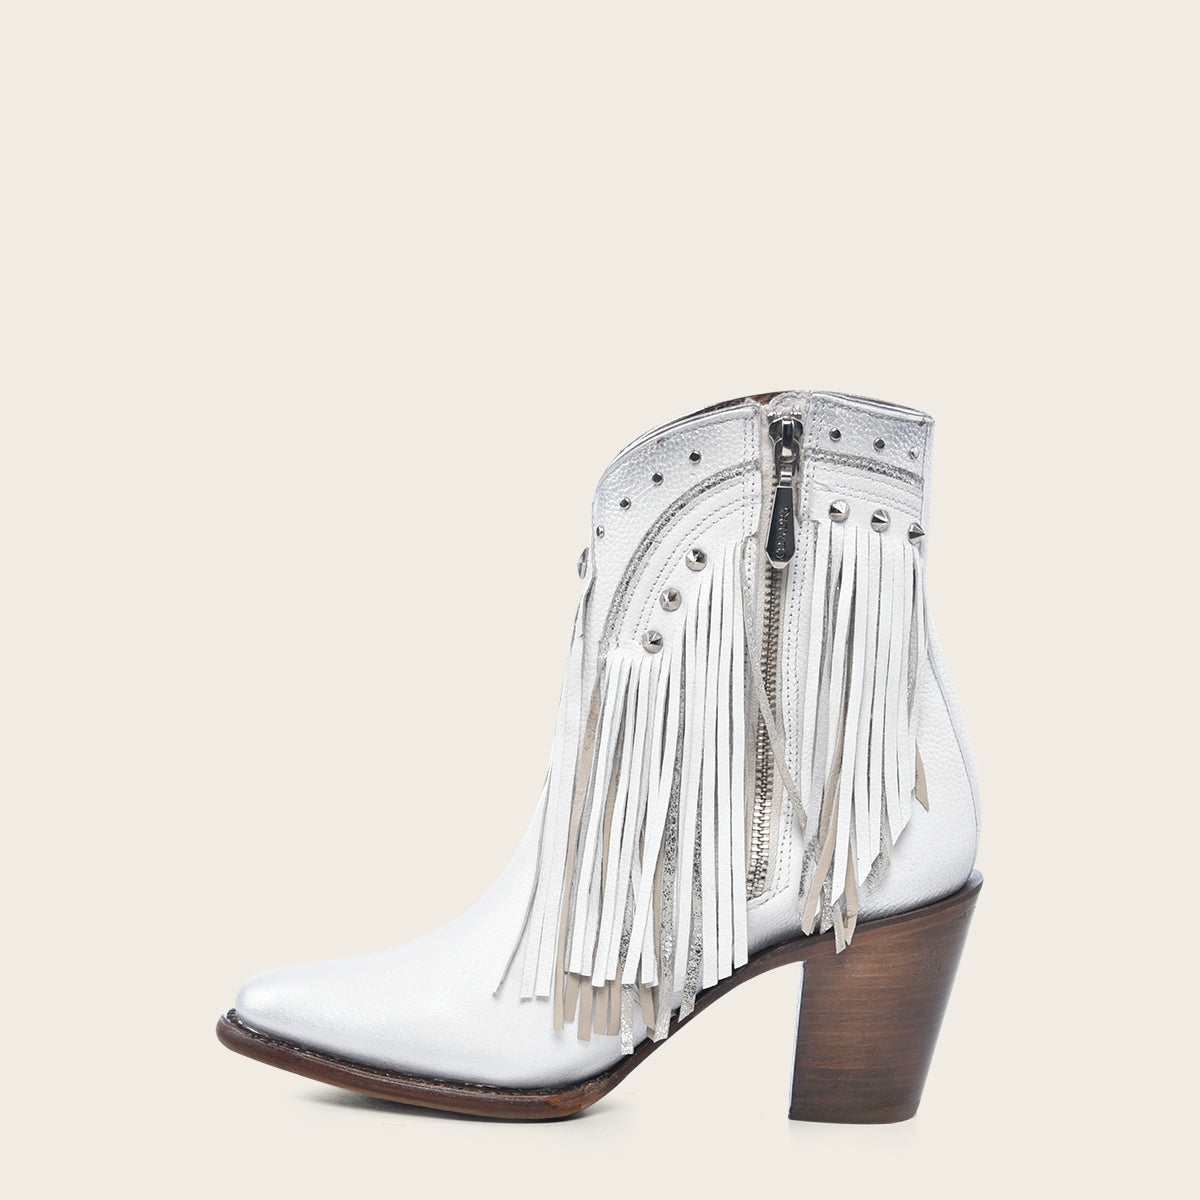 White ankle bootie for women with decorative fringes